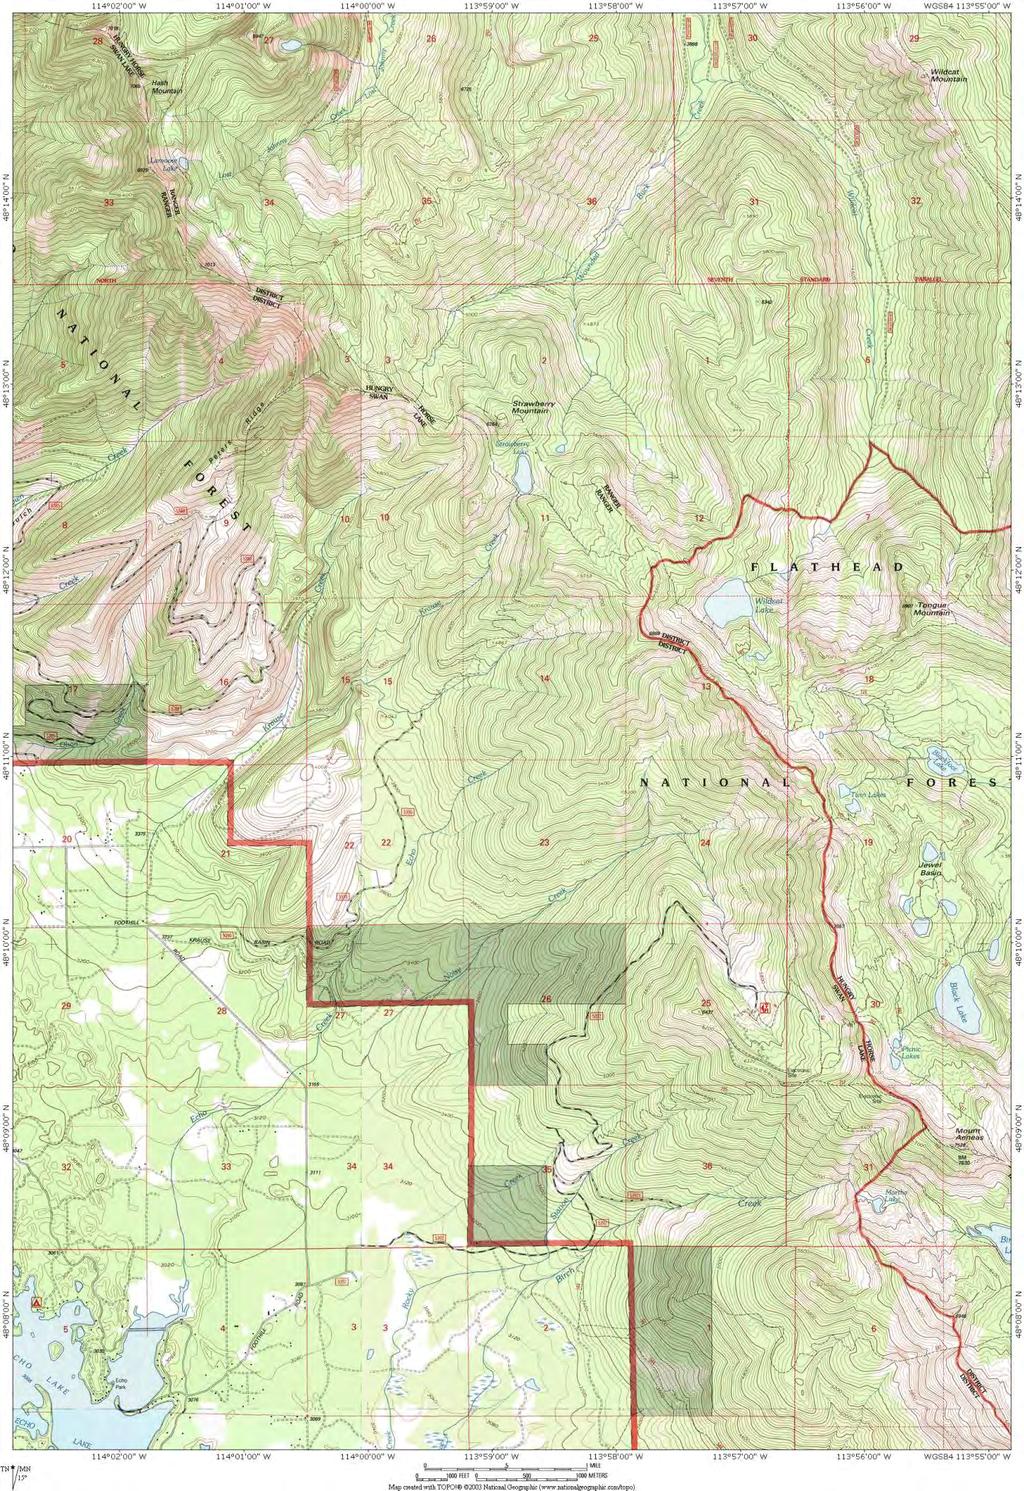 Thursday s Approximated Recovery Access Map Twin - Wildcat Lakes Avalanche Site Legend Motor Vehicle Access USFS Ski Access